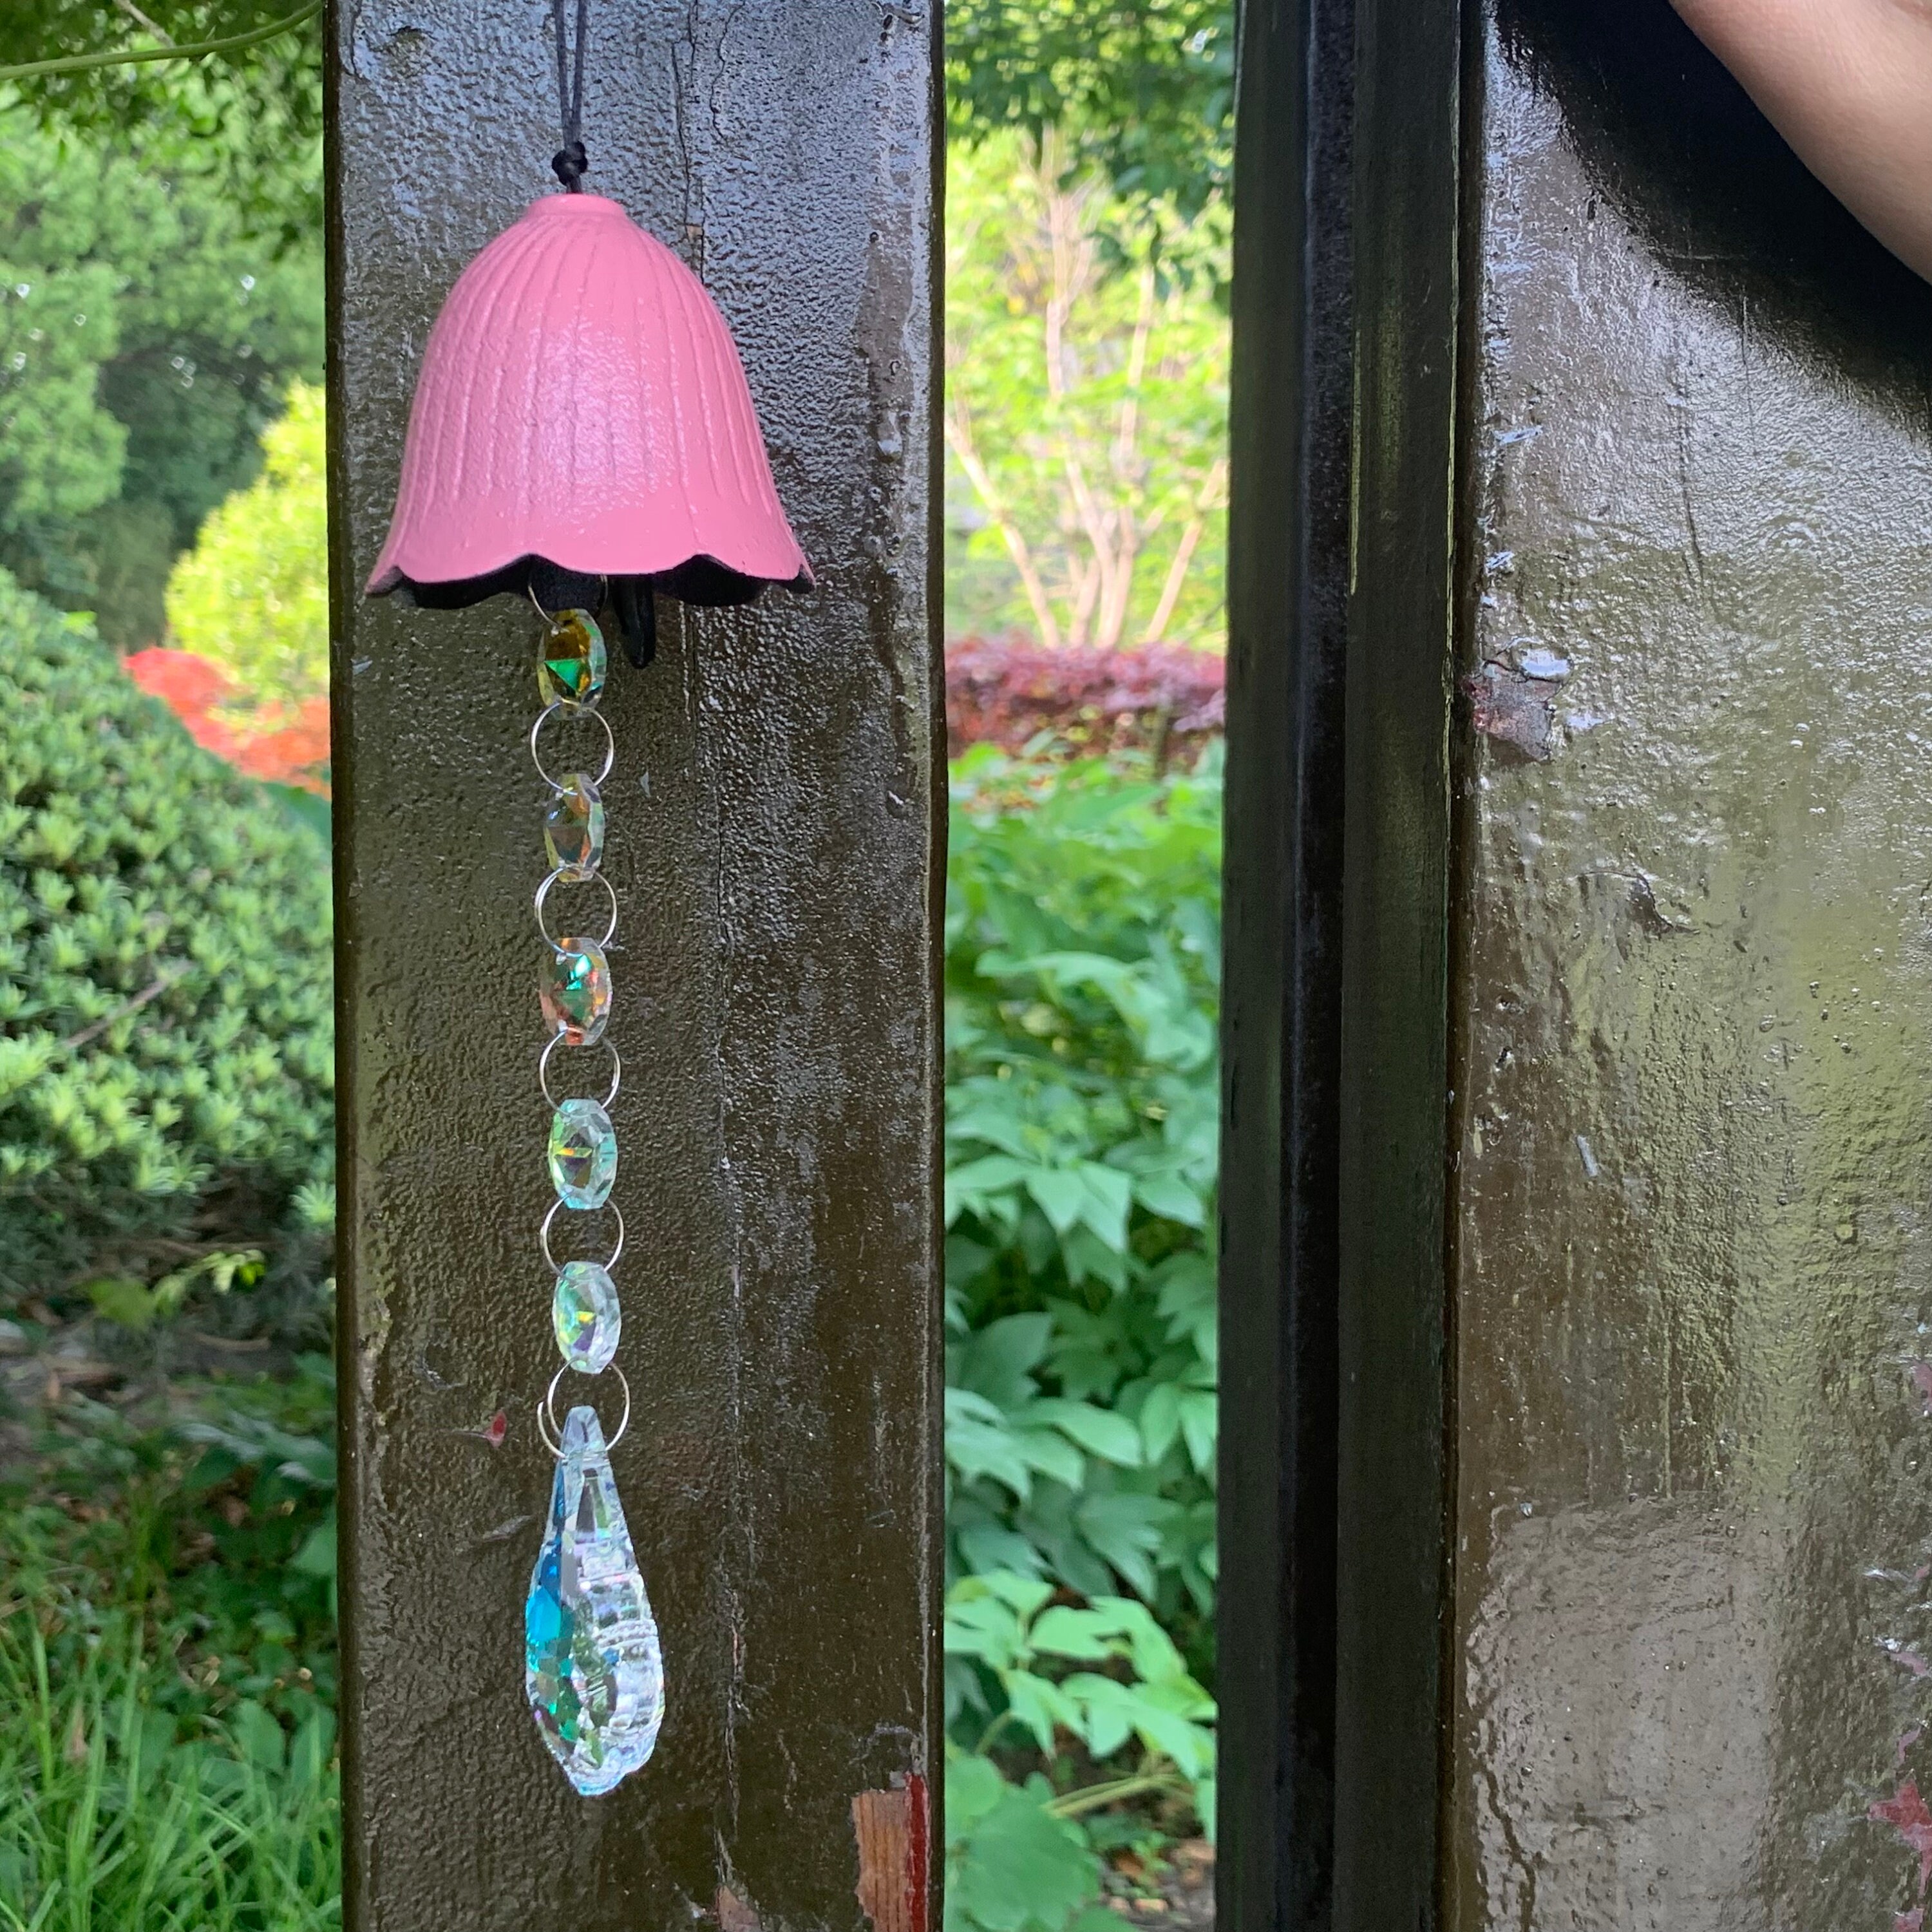 Hanging Witch Bells for Door Protections, Crystal Suncatchers,Hanging Bells  for Wreath, Handmade Suncatcher, Witchy Decor Aesthetic